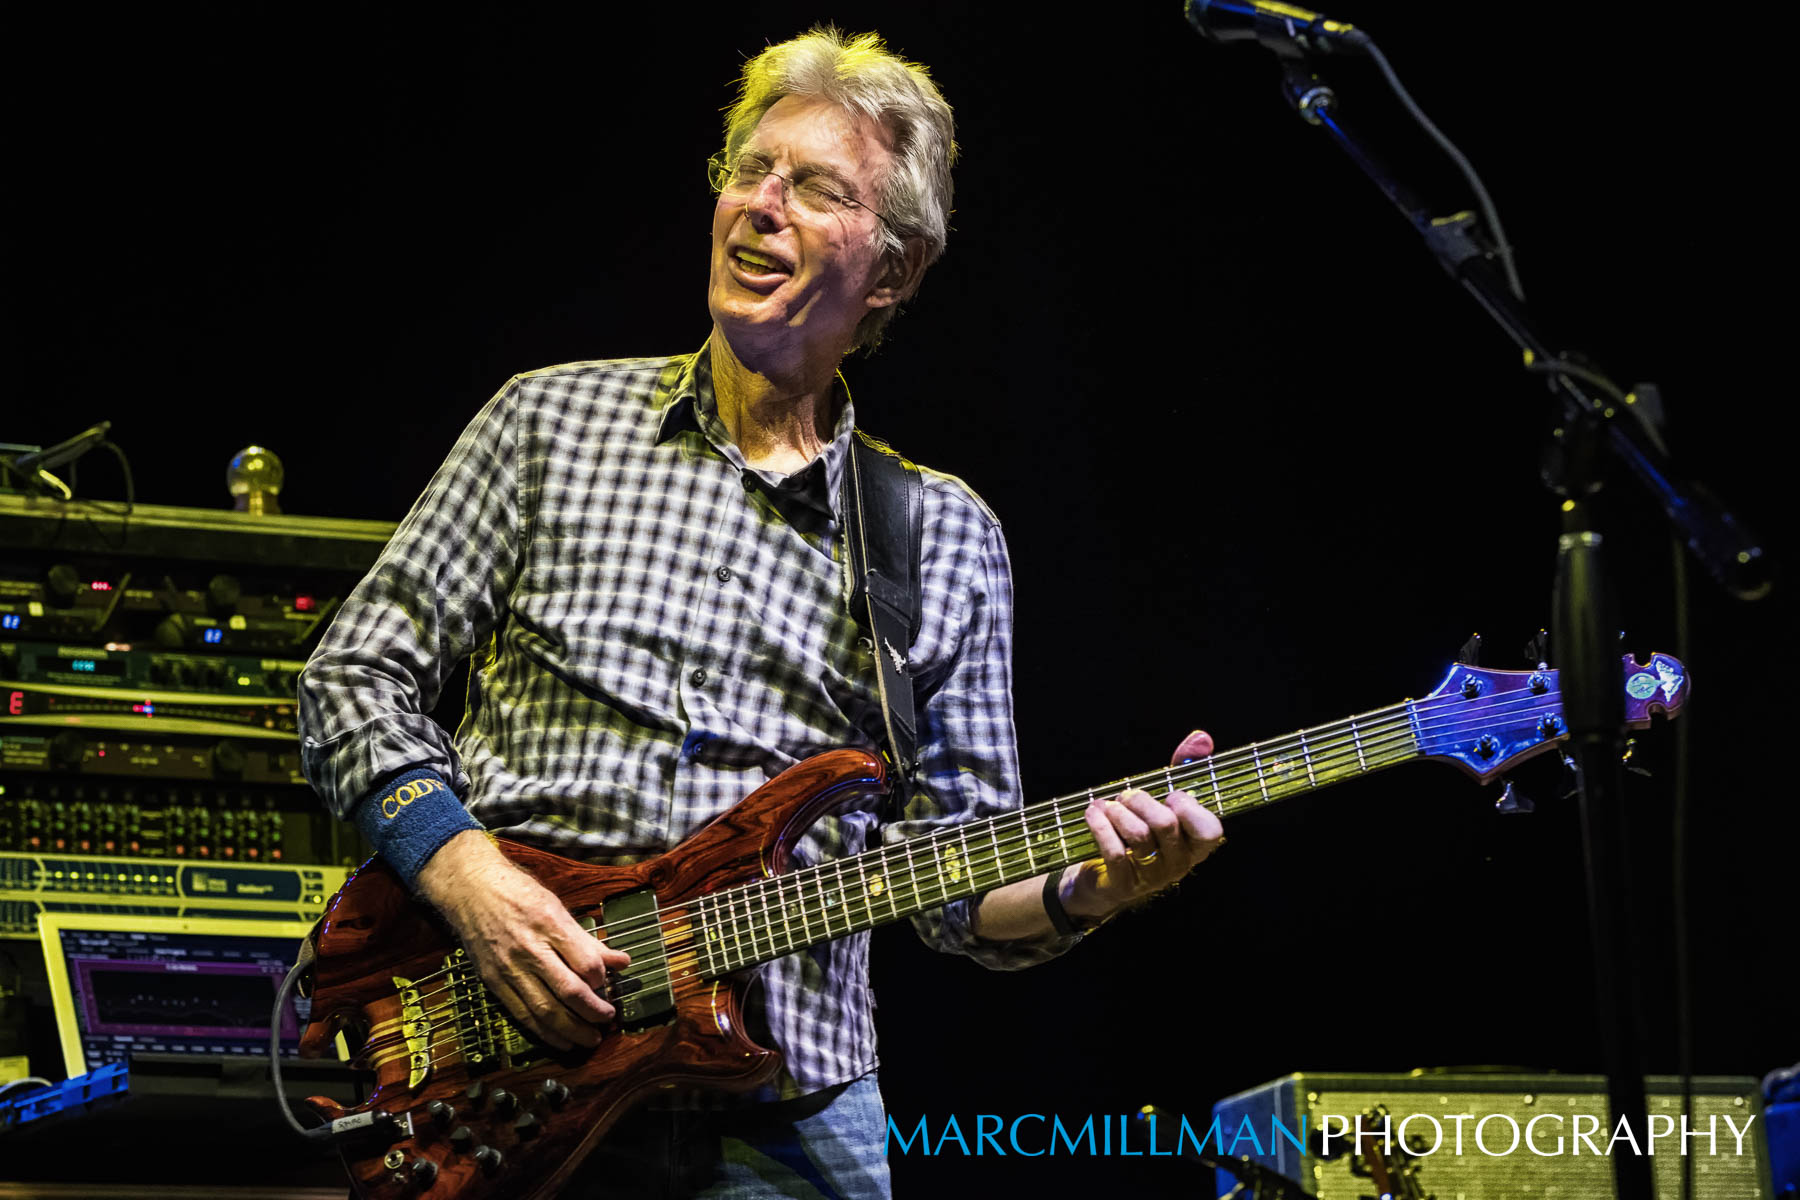 Phil Lesh to Headline Voter Participation Benefit at the Apollo Theater with the Harlem Gospel Choir, Terrapin Family Band and More